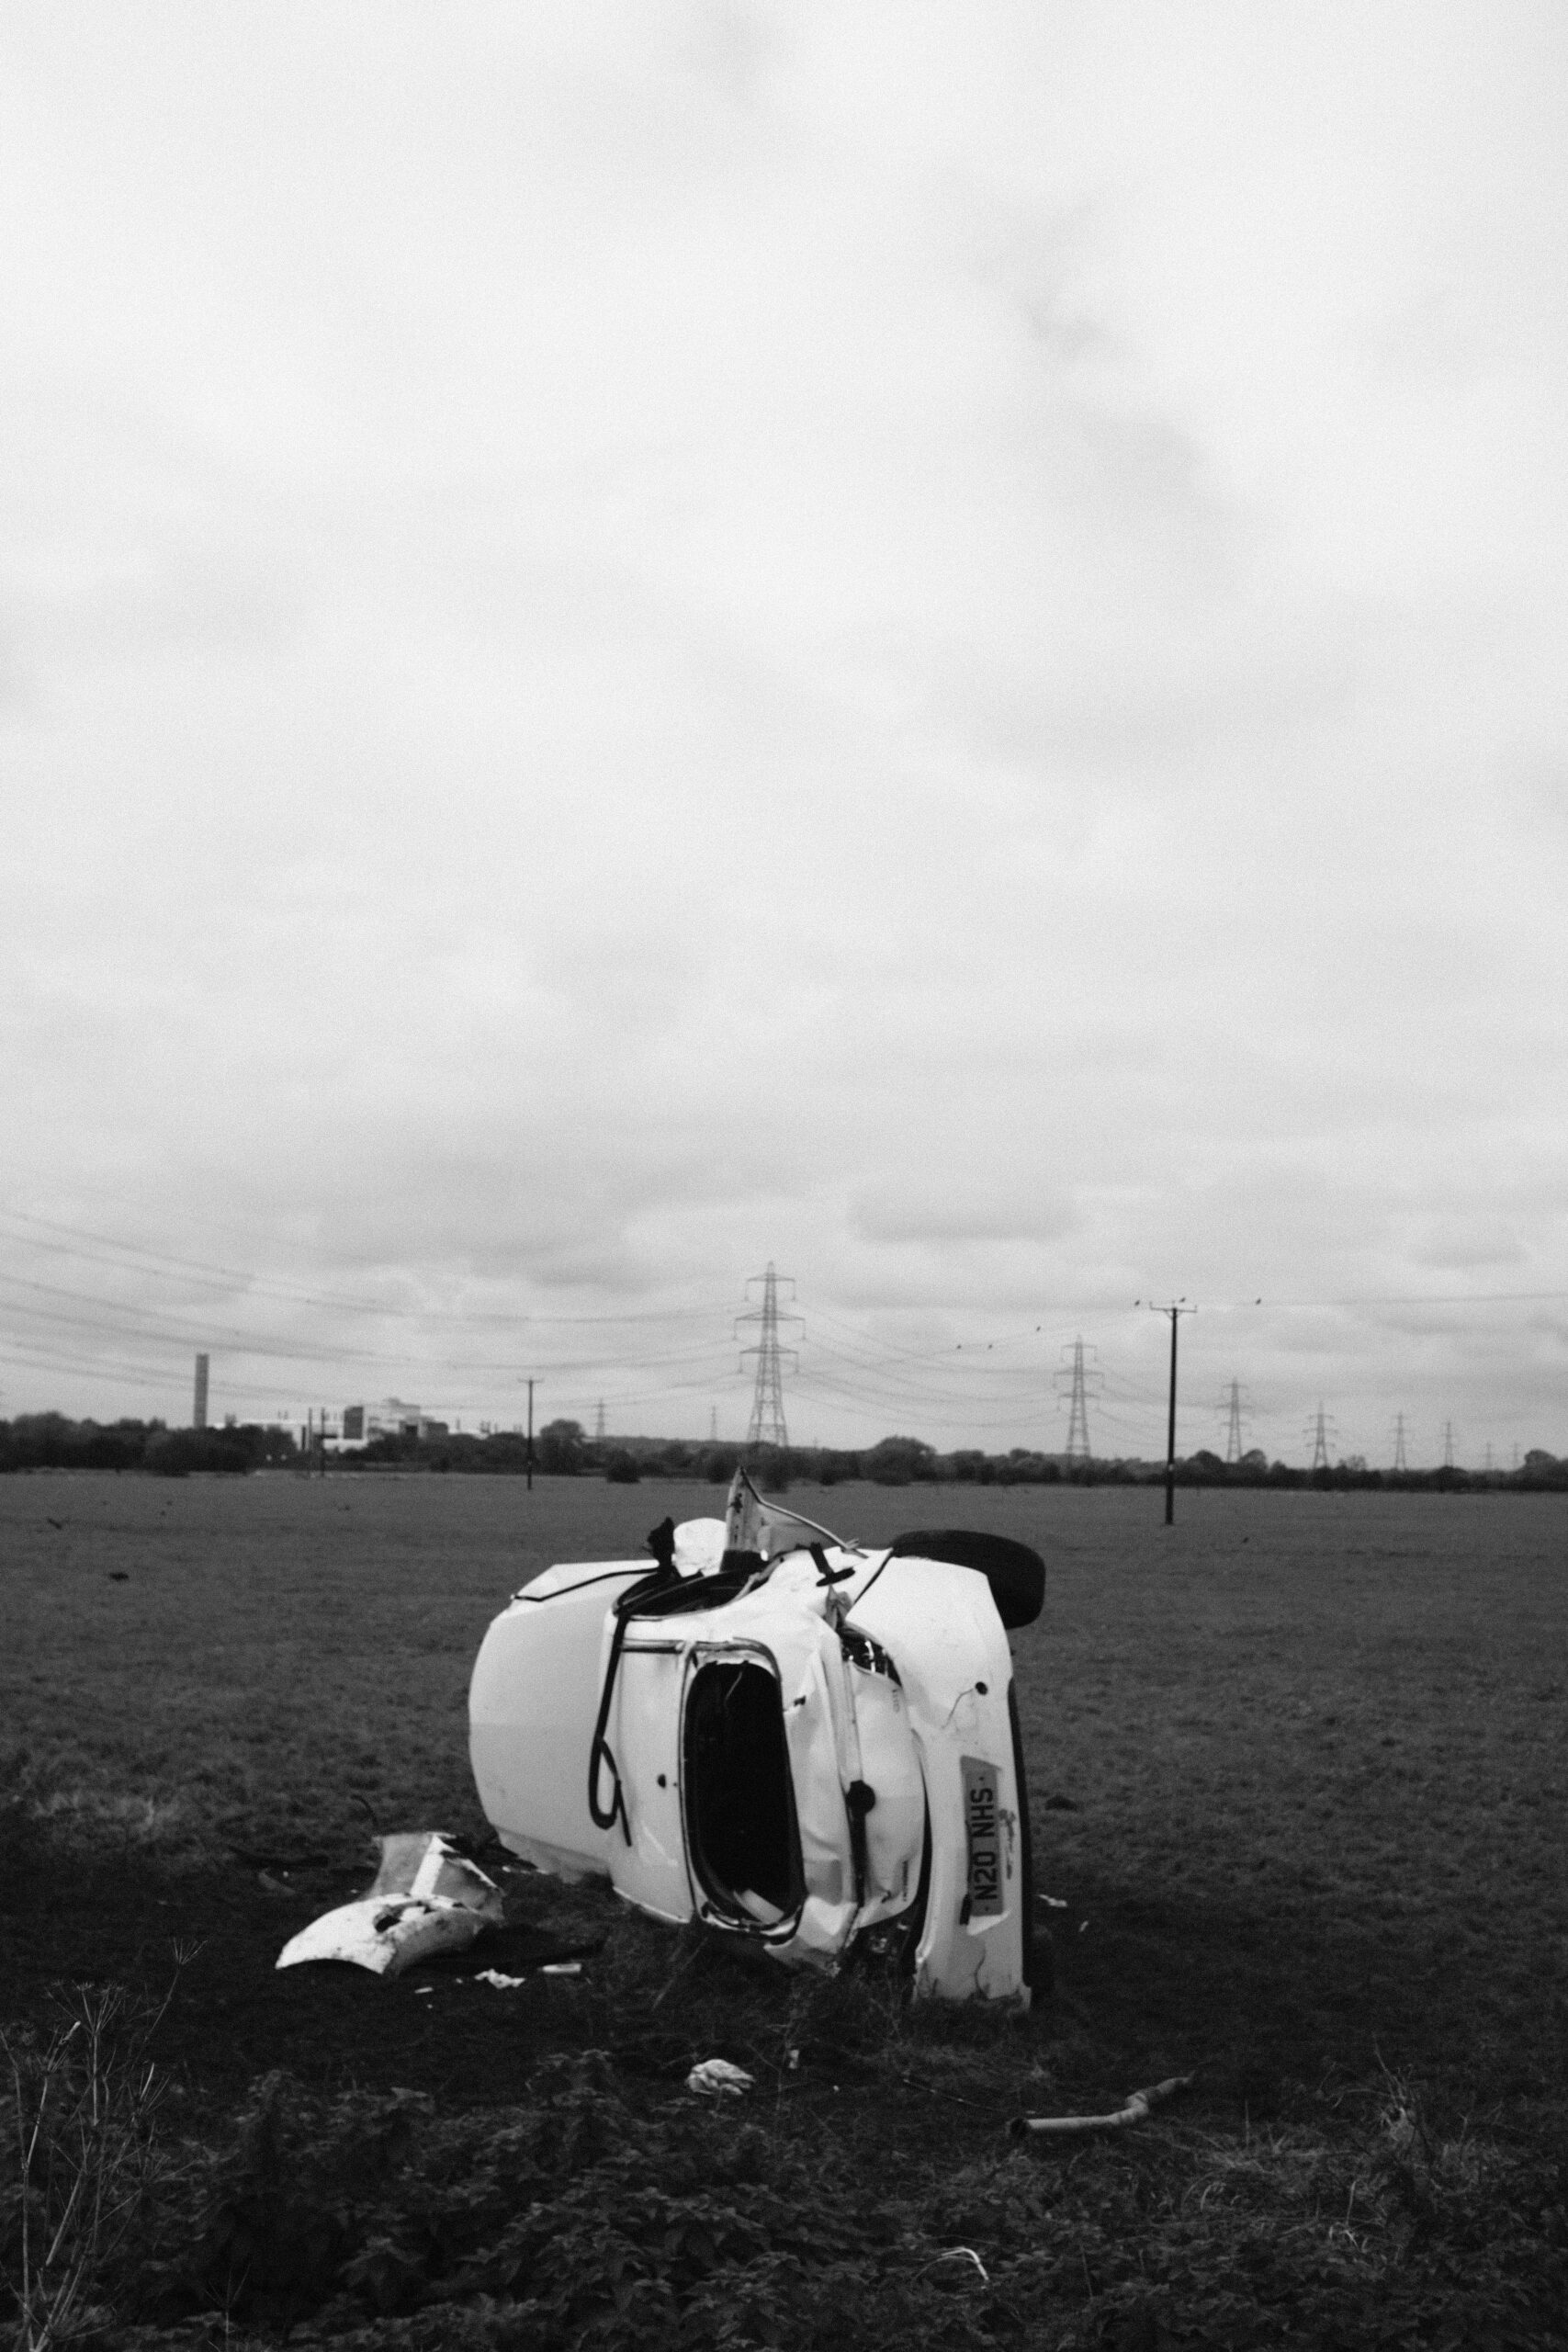 Black and white image of a totaled vehicle in a field after a severe car crash, emphasizing the need for a personal injury lawyer